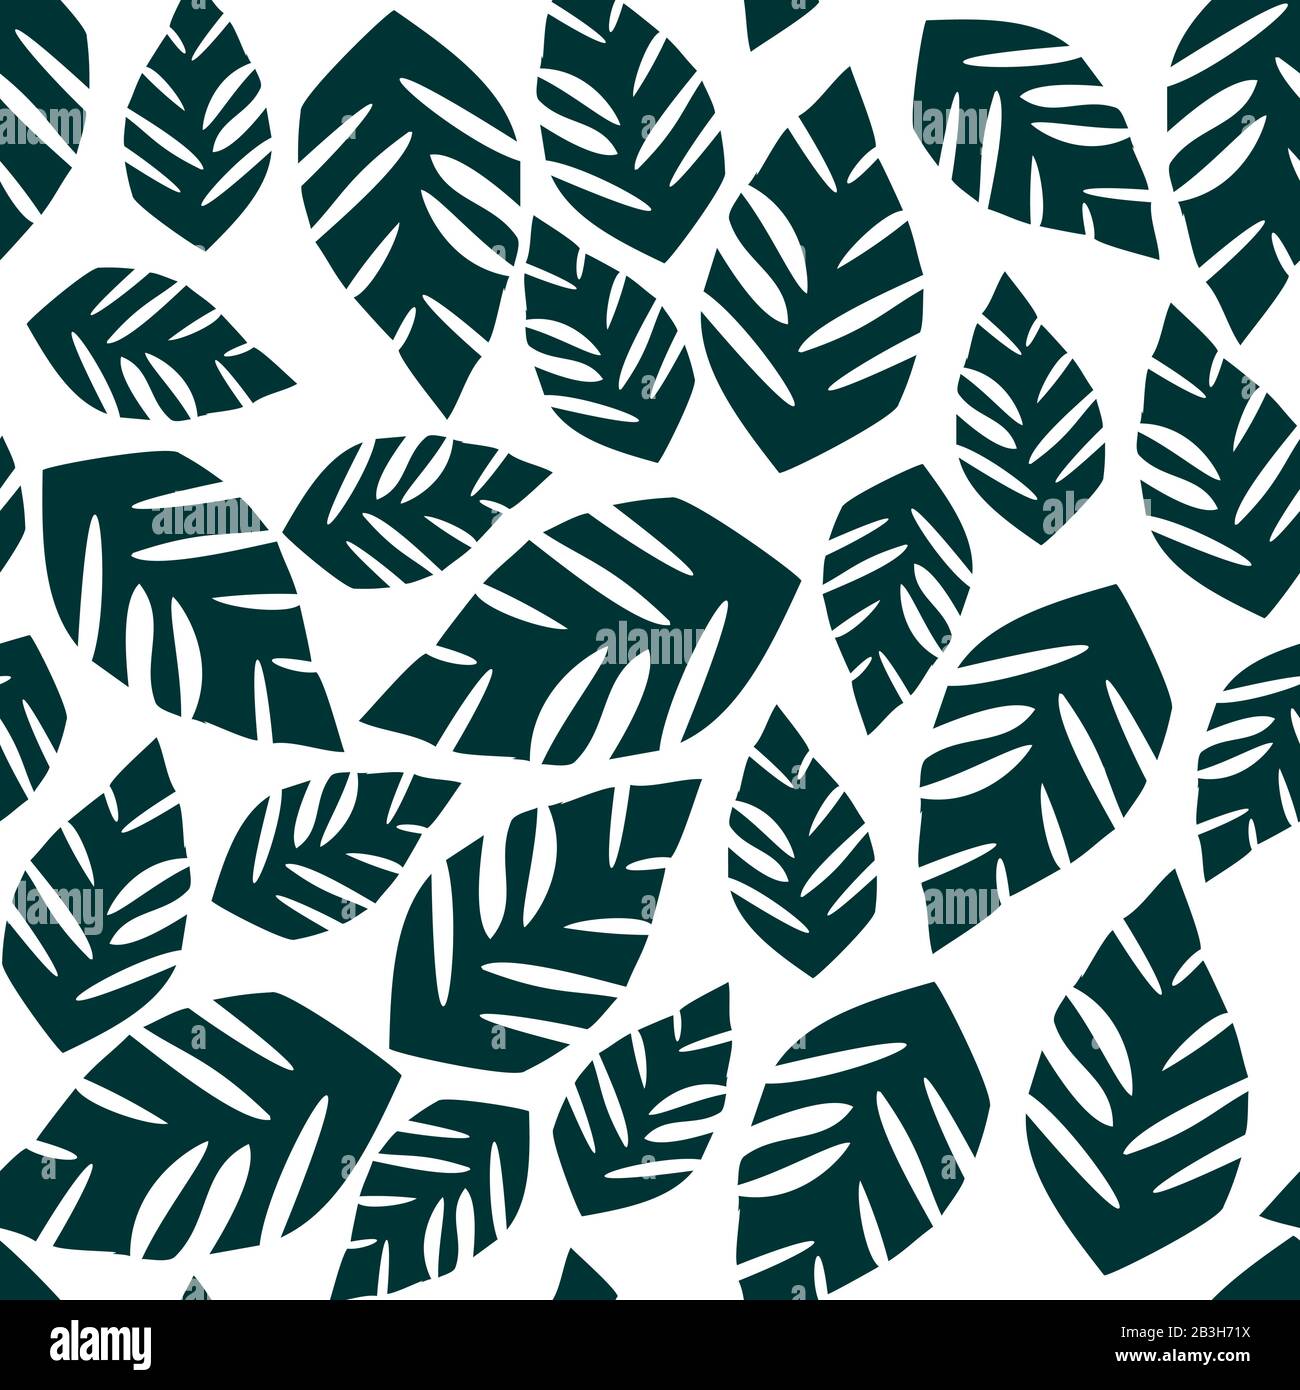 Exotic Tropical Vector Seamless Pattern. Leaves Of Palm Trees, Monstera, Leaves In The Jungle. Hand drawn. For Design, Wrapping Paper, Fabric, Textile Stock Vector